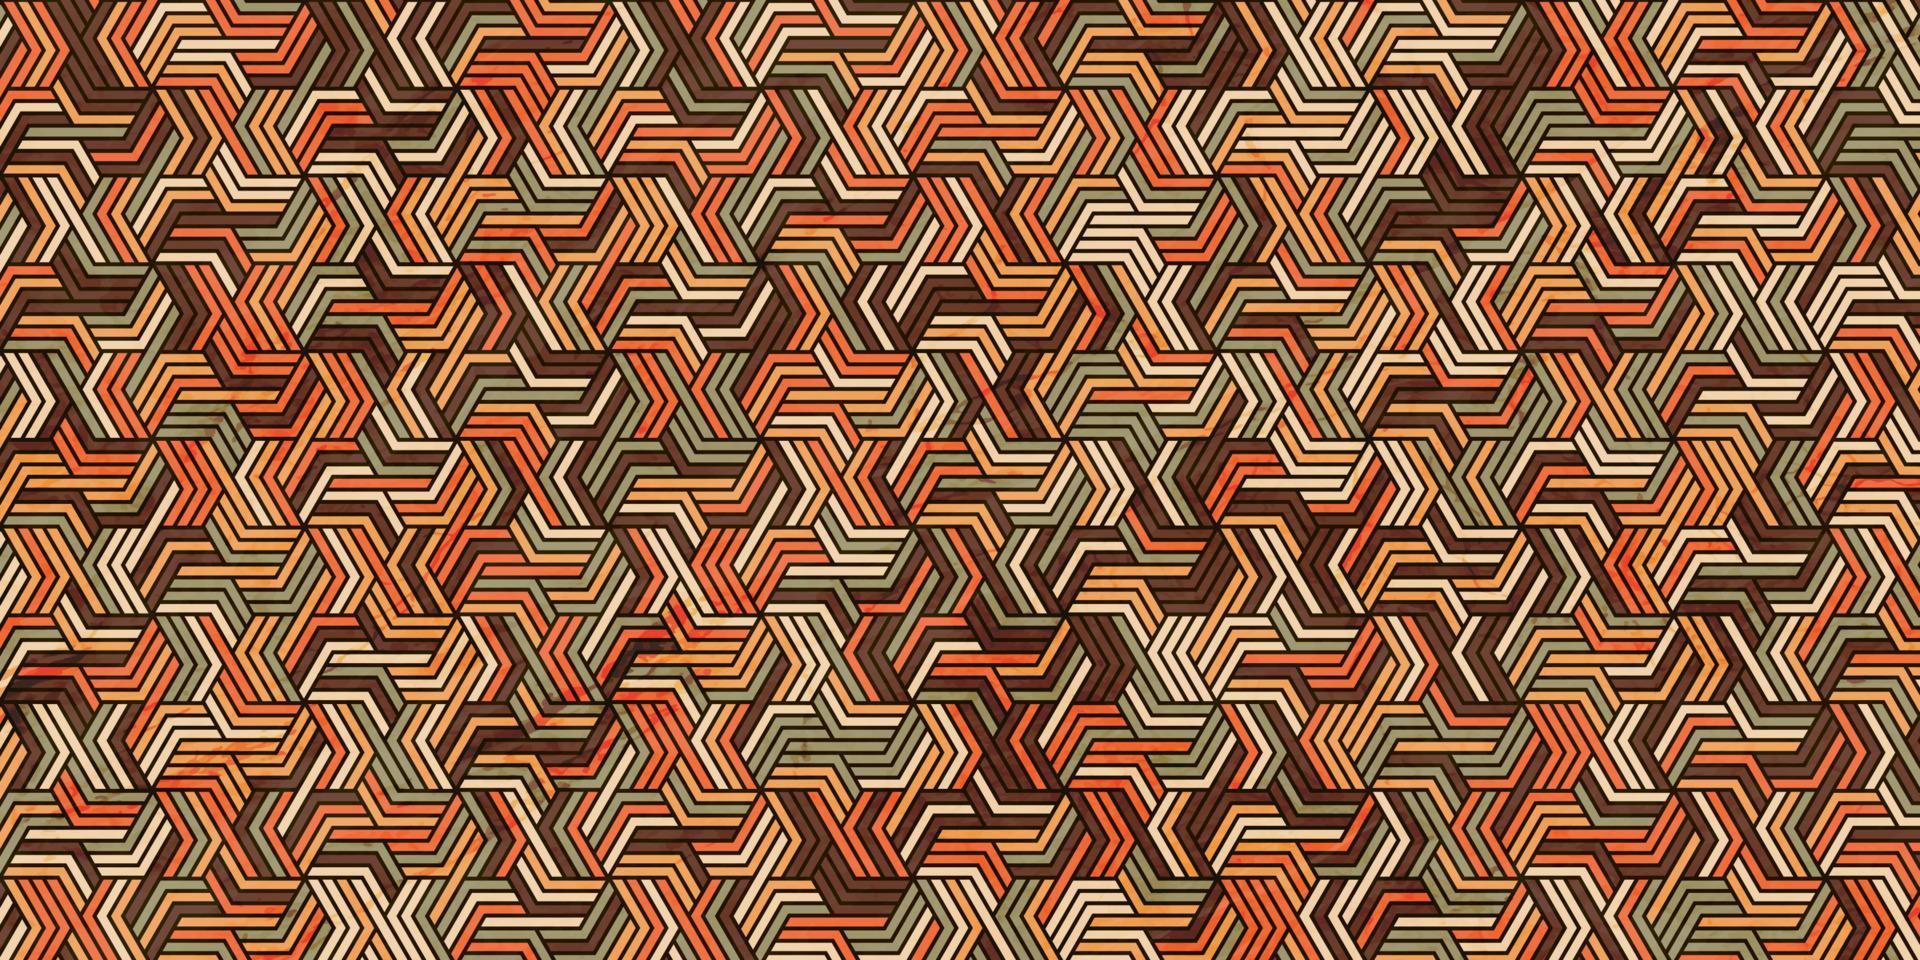 Geometric pattern with stripes wavy lines orange background vector